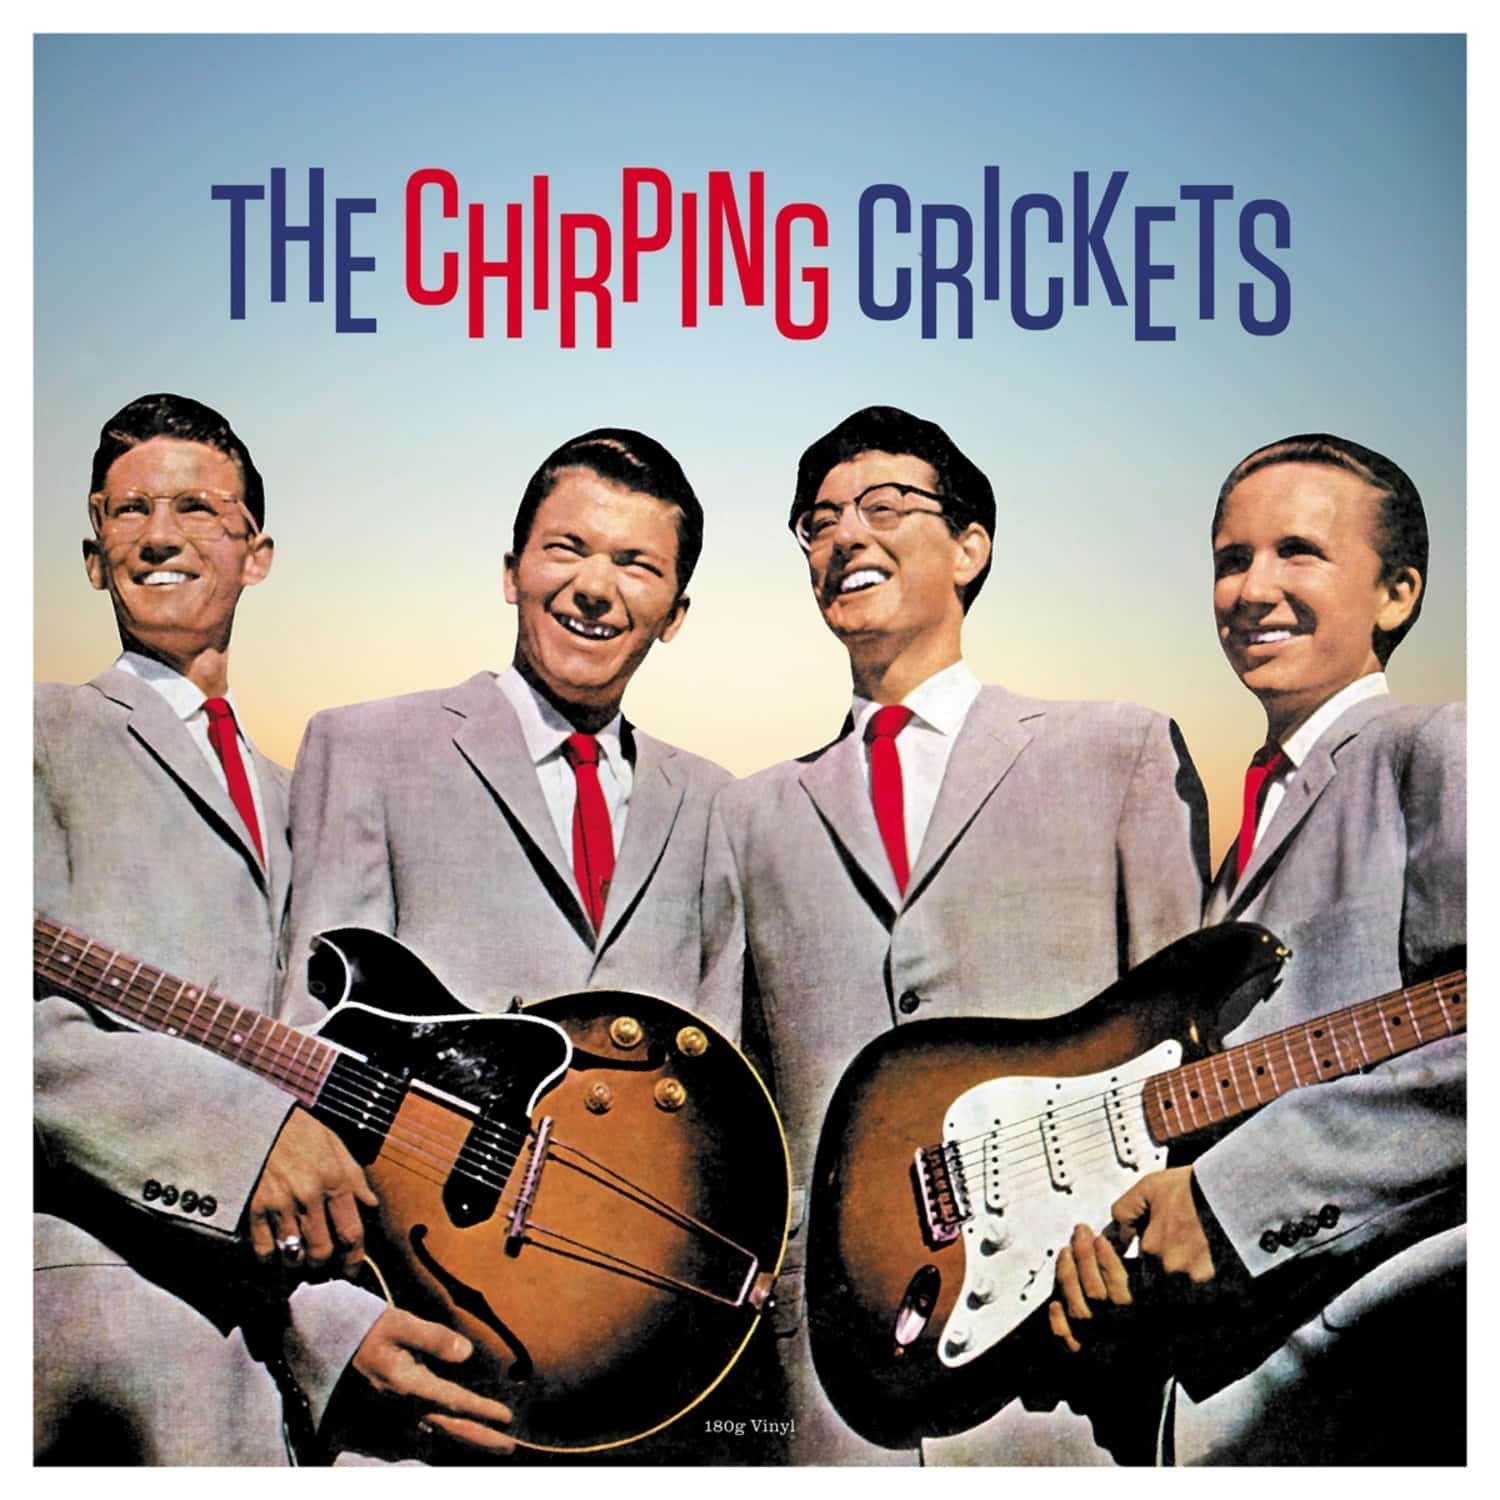 Crickets - THE CHIRPING CRICKETS 